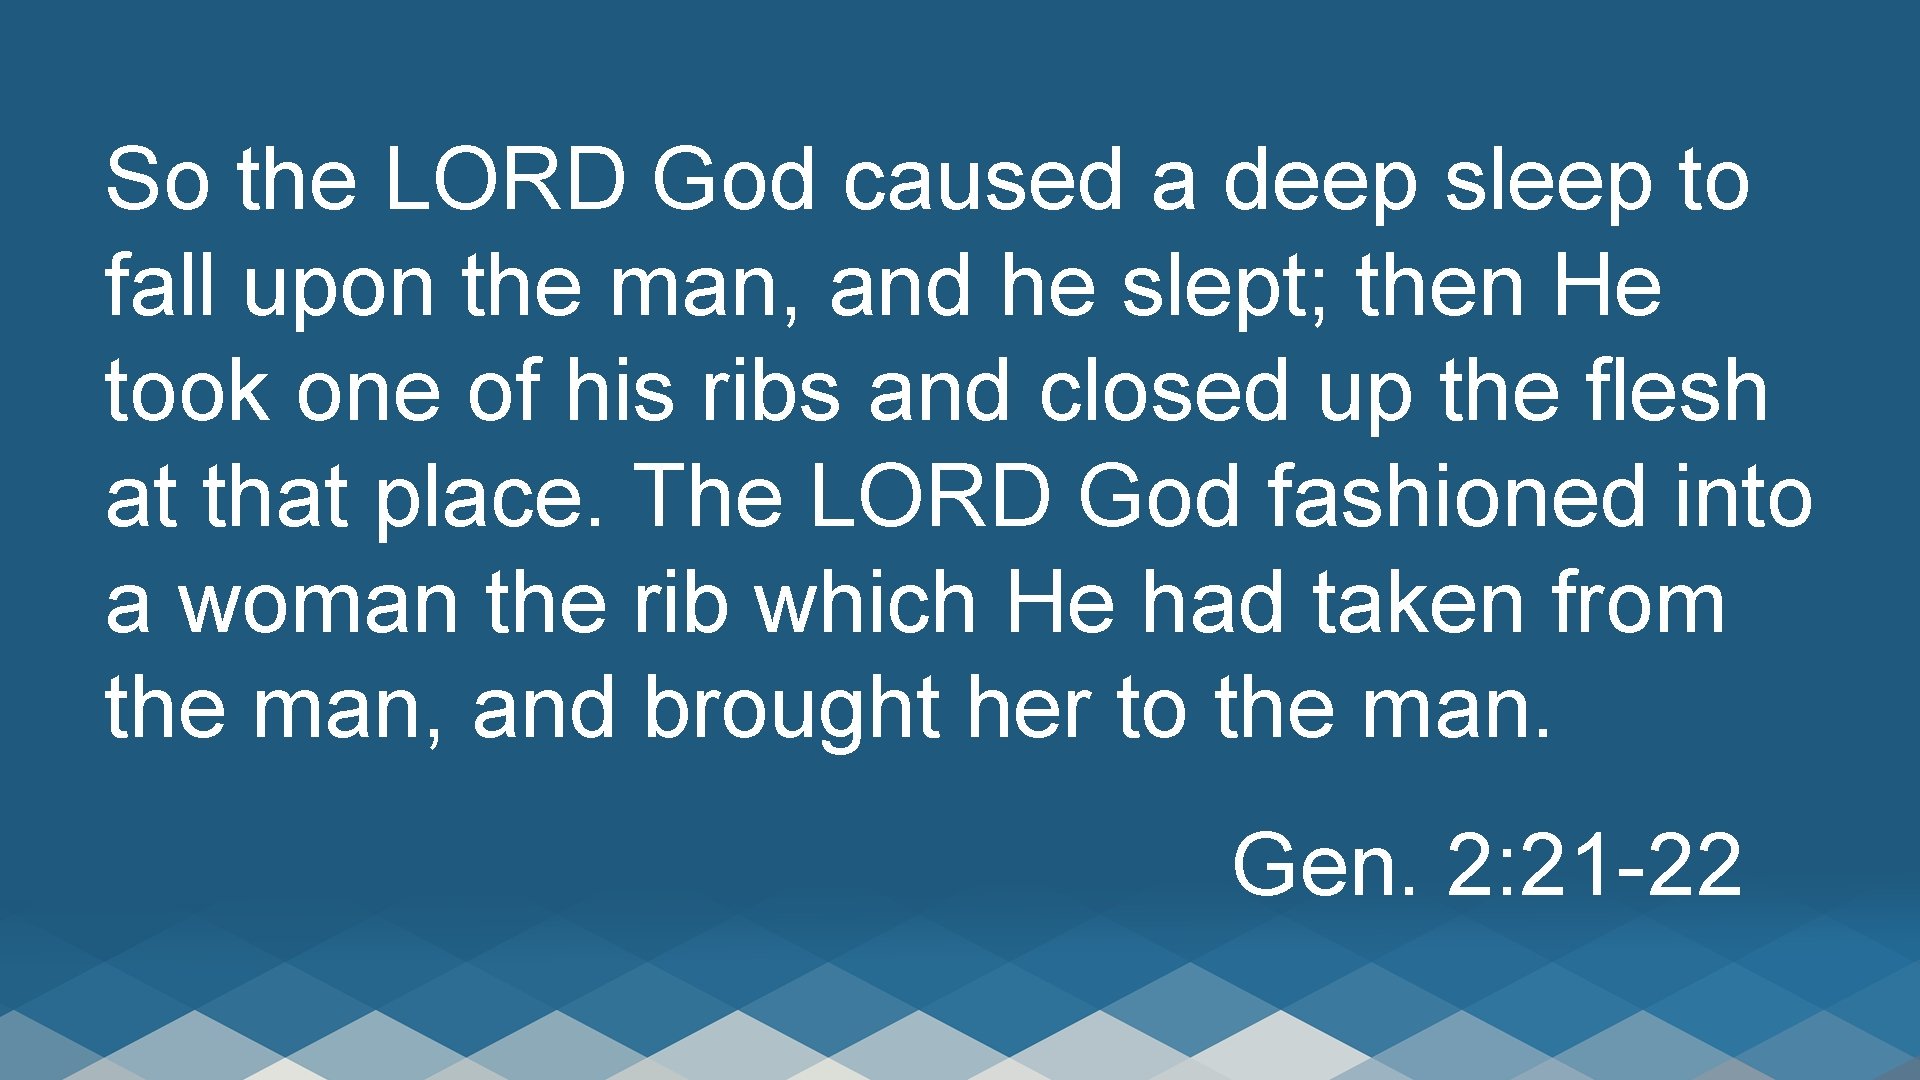 So the LORD God caused a deep sleep to fall upon the man, and